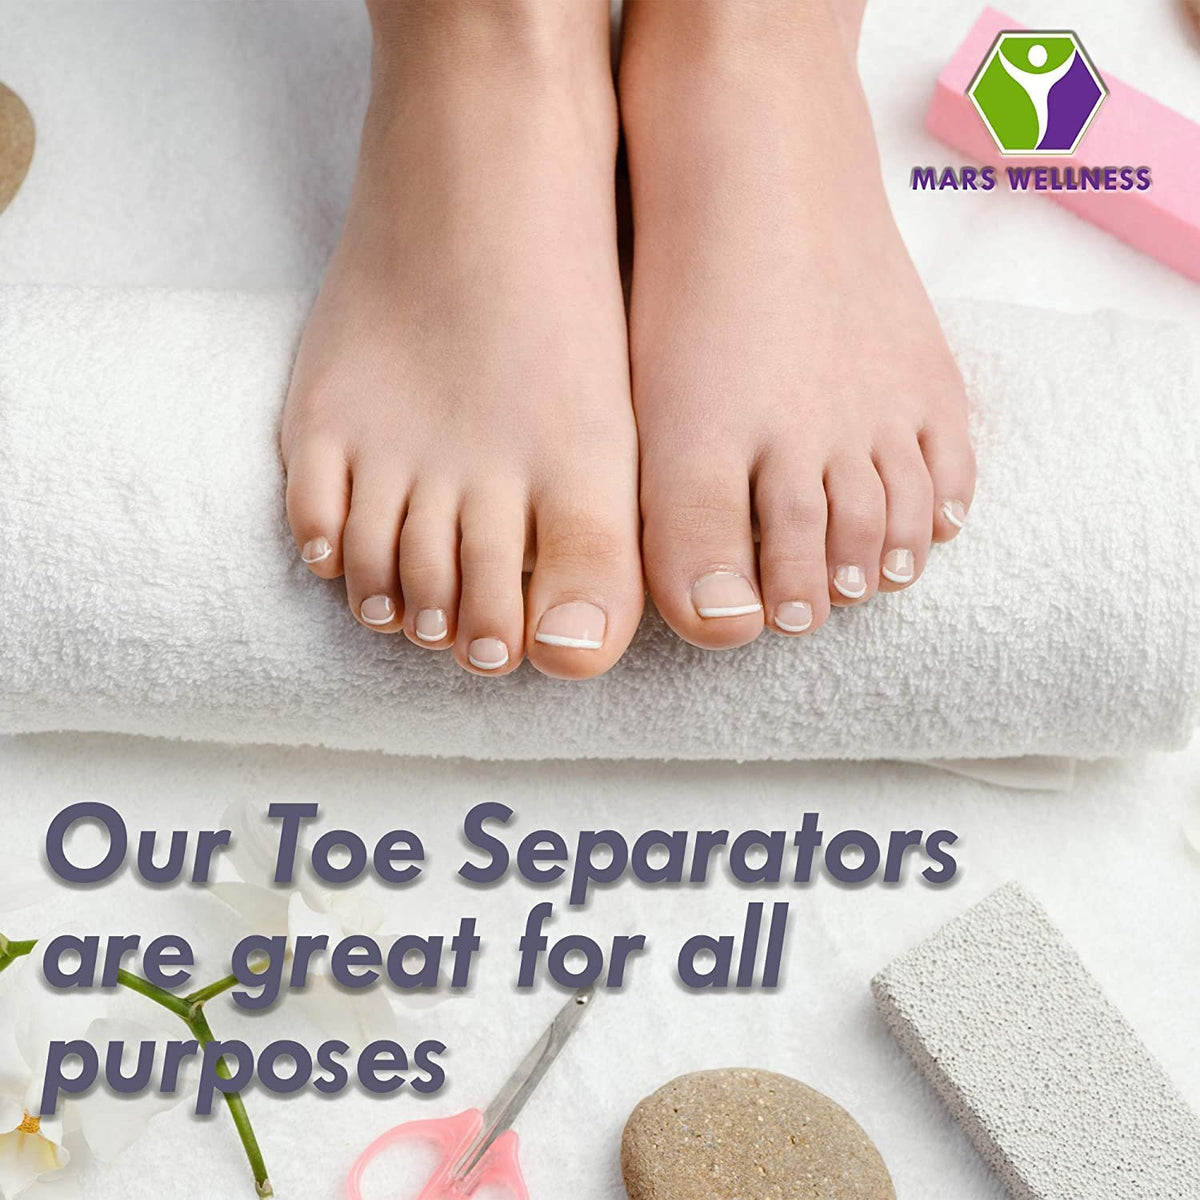 Mars Wellness Full Foam Toe Separators - Toe Spacers for Corn, Blisters, and Hammer Toe Relief - 1/4 Inch